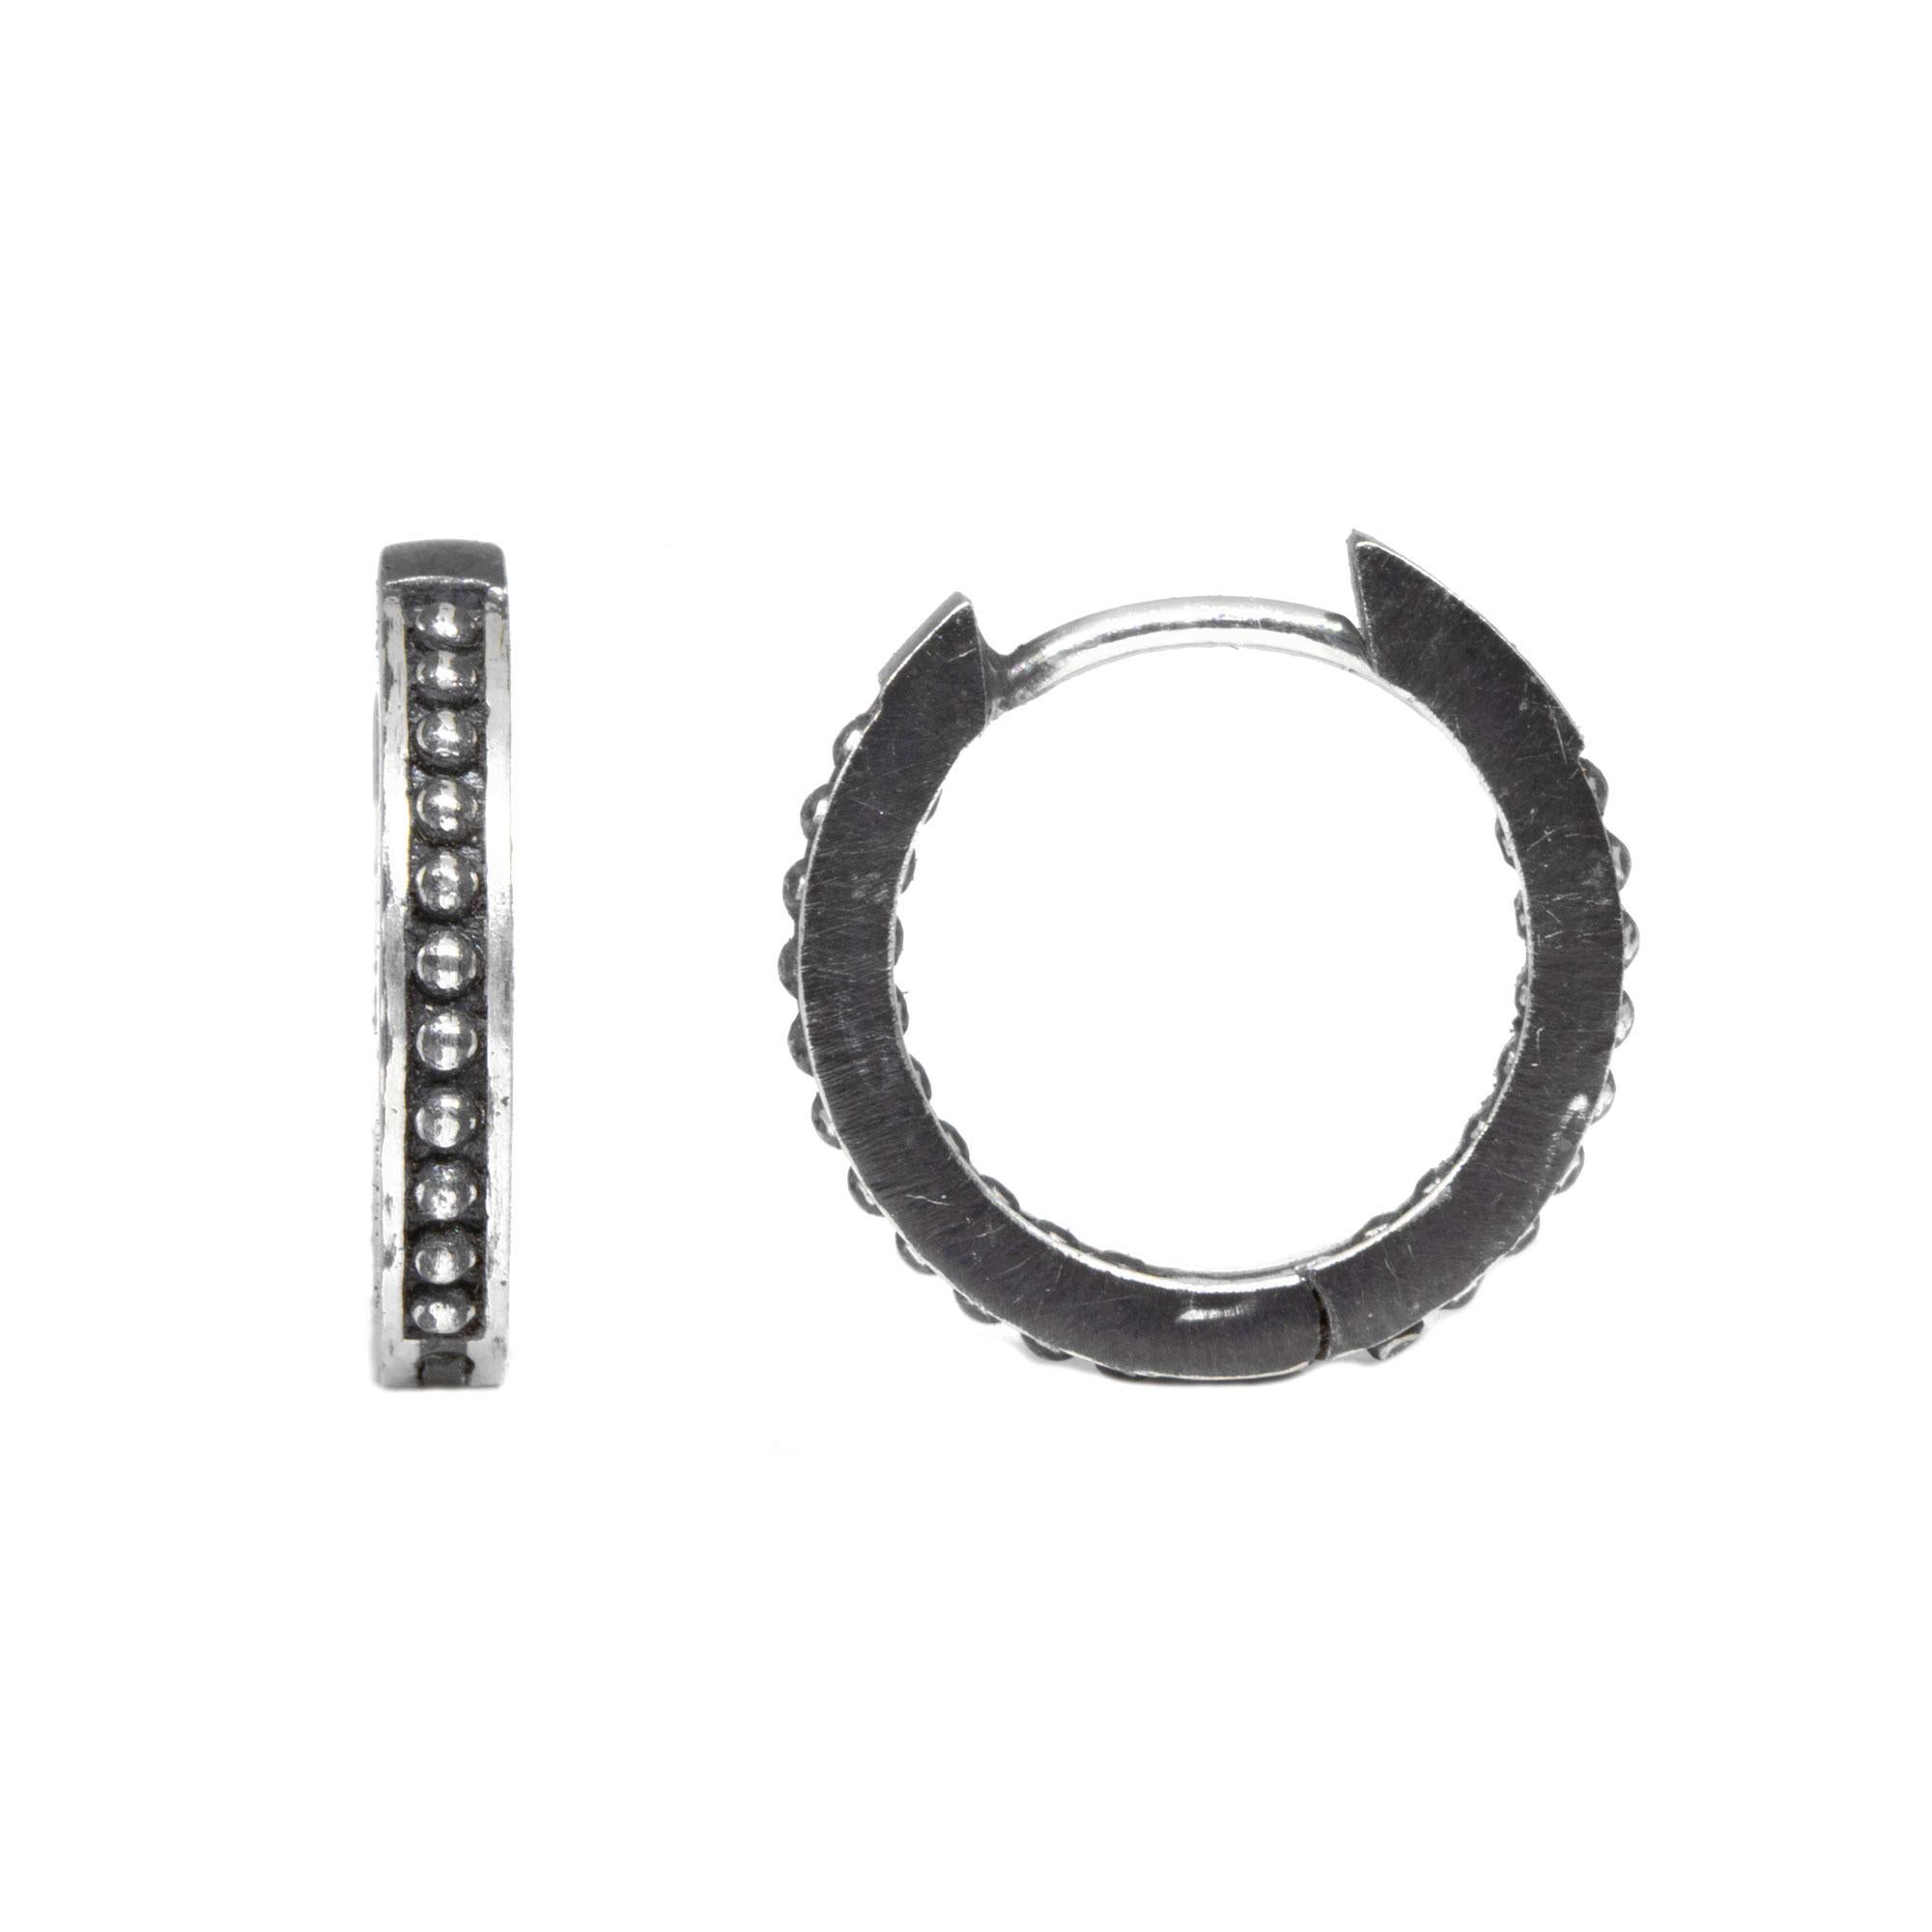 Inset with tiny silver beads, the Pagoda 15mm Oxidized Silver Hoops are made for dangling your favorite Charms (or a few). Or wear them on their own for an effortless, understated look

Details
Metal: Black Oxidized Silver
Size: 15mm

The Maker:
Our